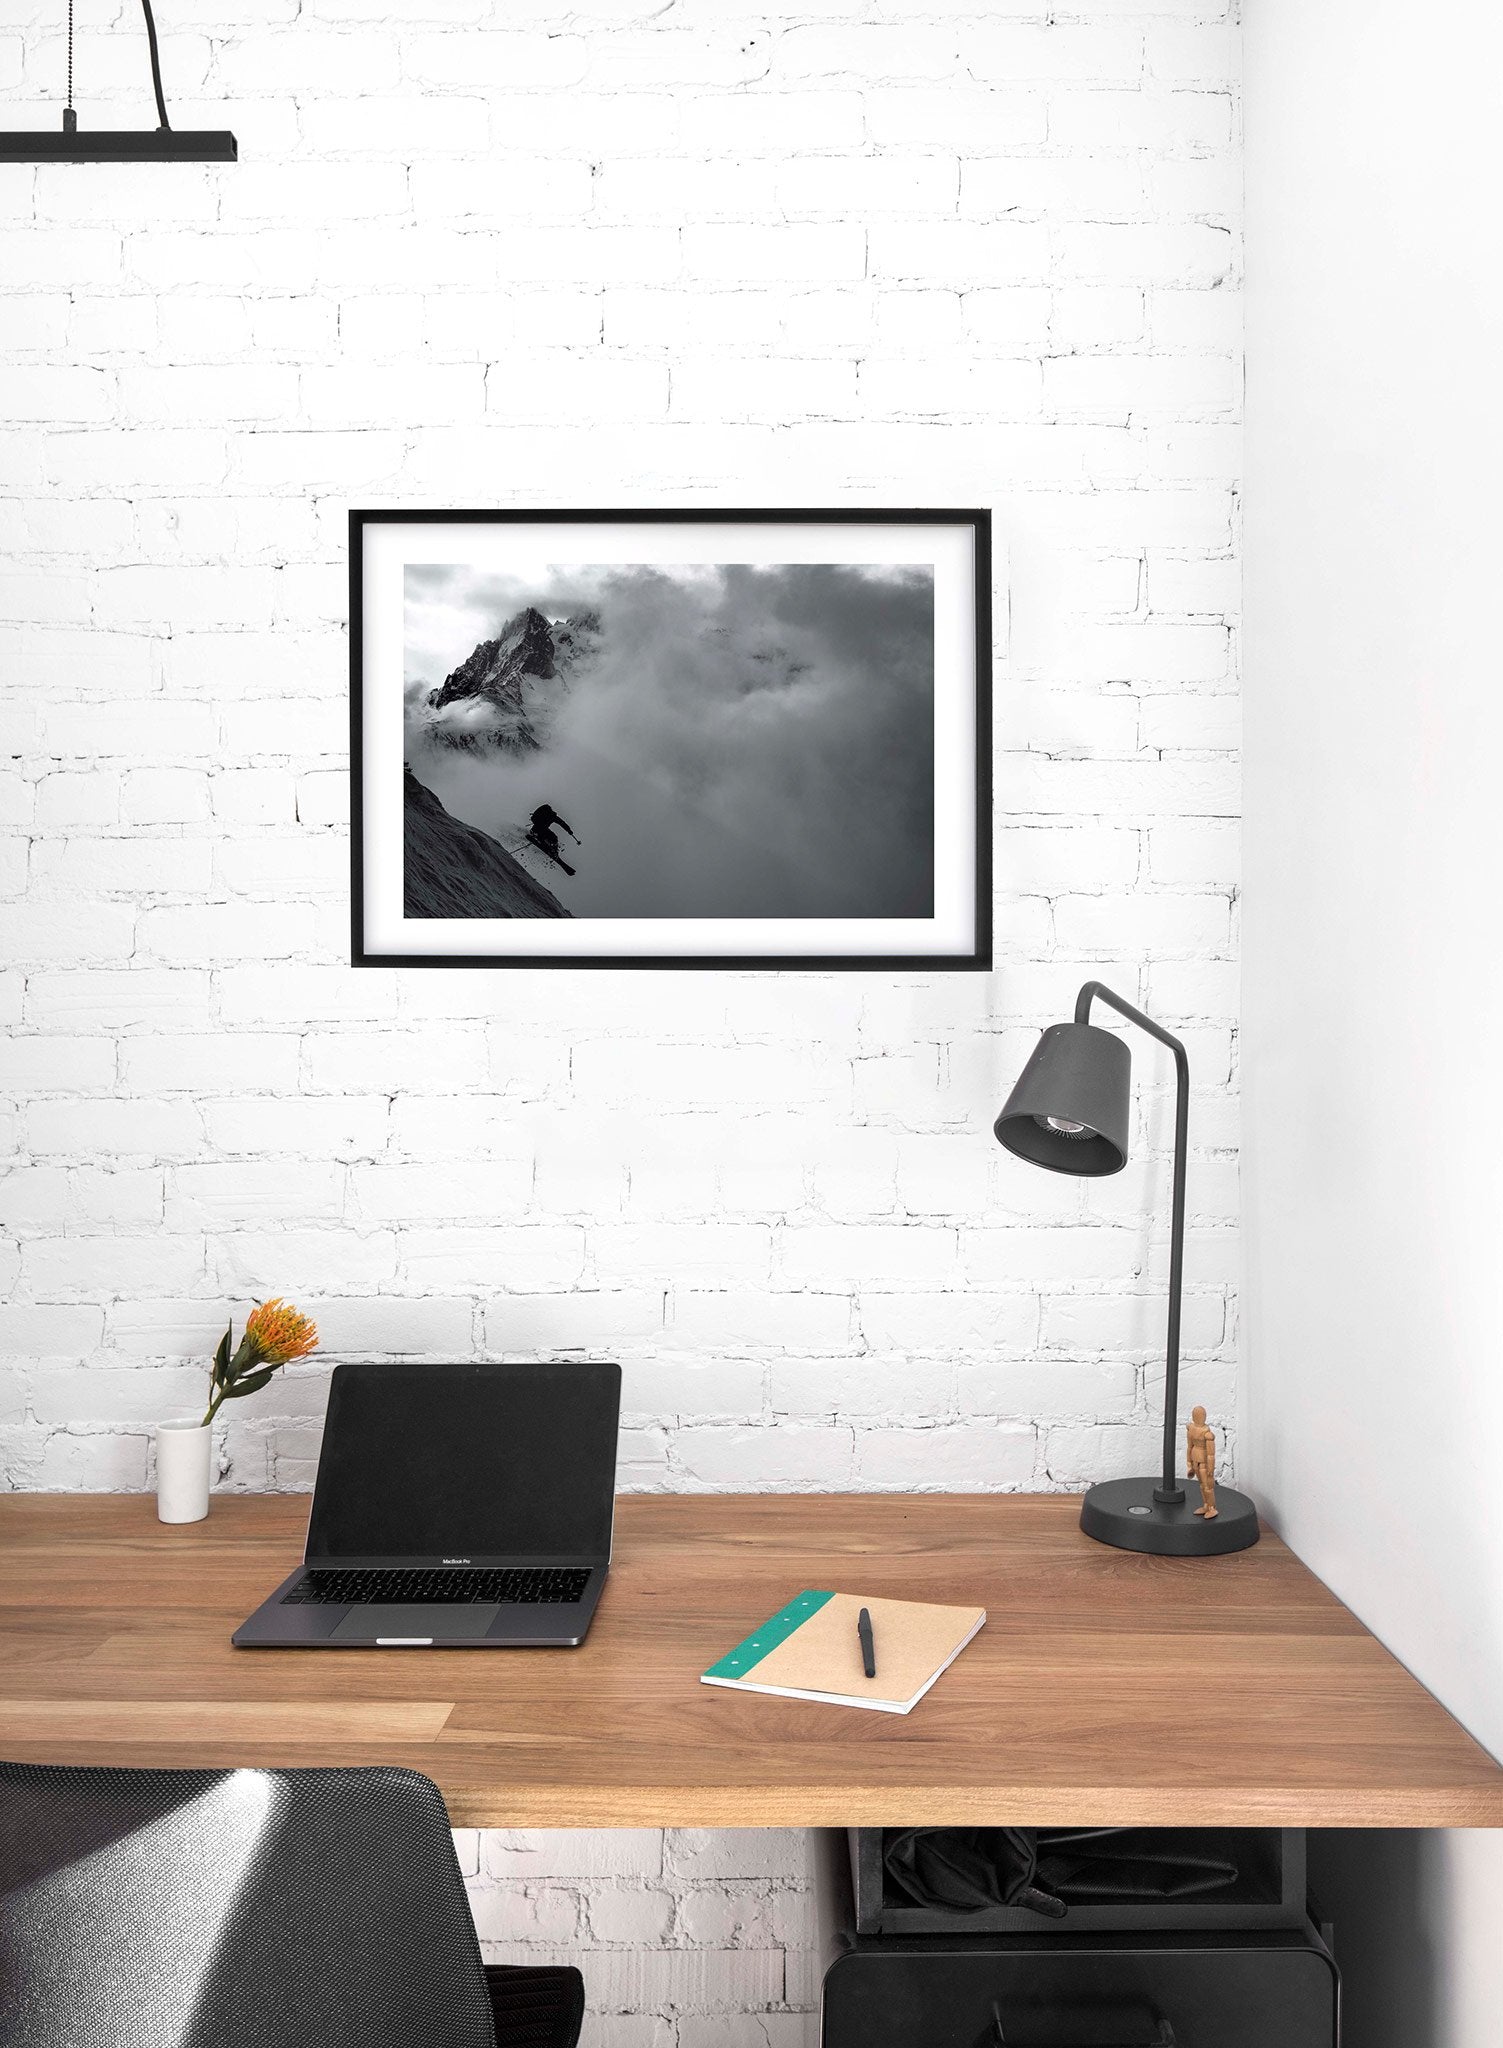 Landscape photography poster by Opposite Wall with adventure extreme skier on mountain - Lifestyle - Office Desk